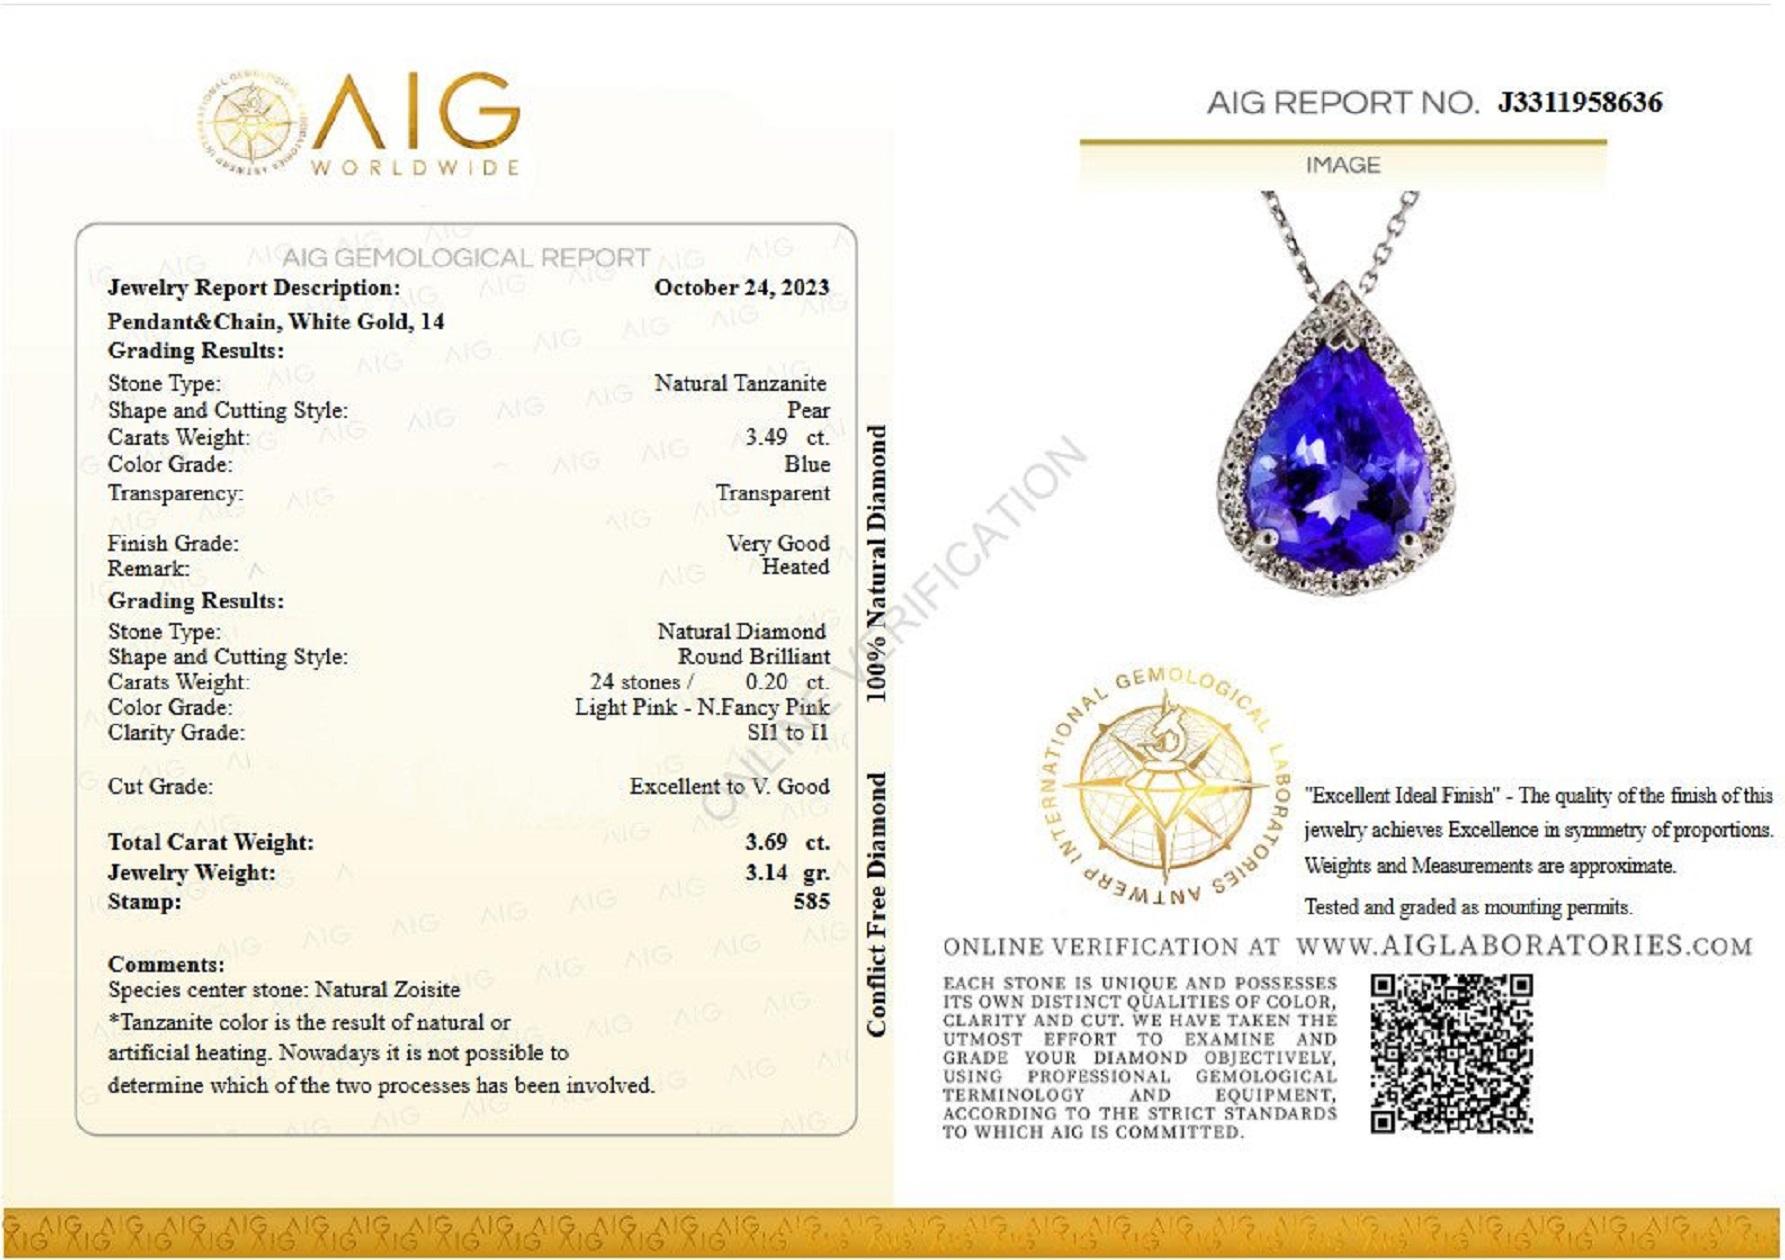 Center Tanzanite Stone:
Weight: 3.49 carat
Color: Blue
Shape: Pear
Heated

Side Stone:
___________
Natural Diamonds
Cut: Round Brilliant
Carat: 0.20 cttw
Color: Light Pink - N.Fancy Pink
Clarity: SI1 to I1

Length: 55 cm necklace and 1.5 cm